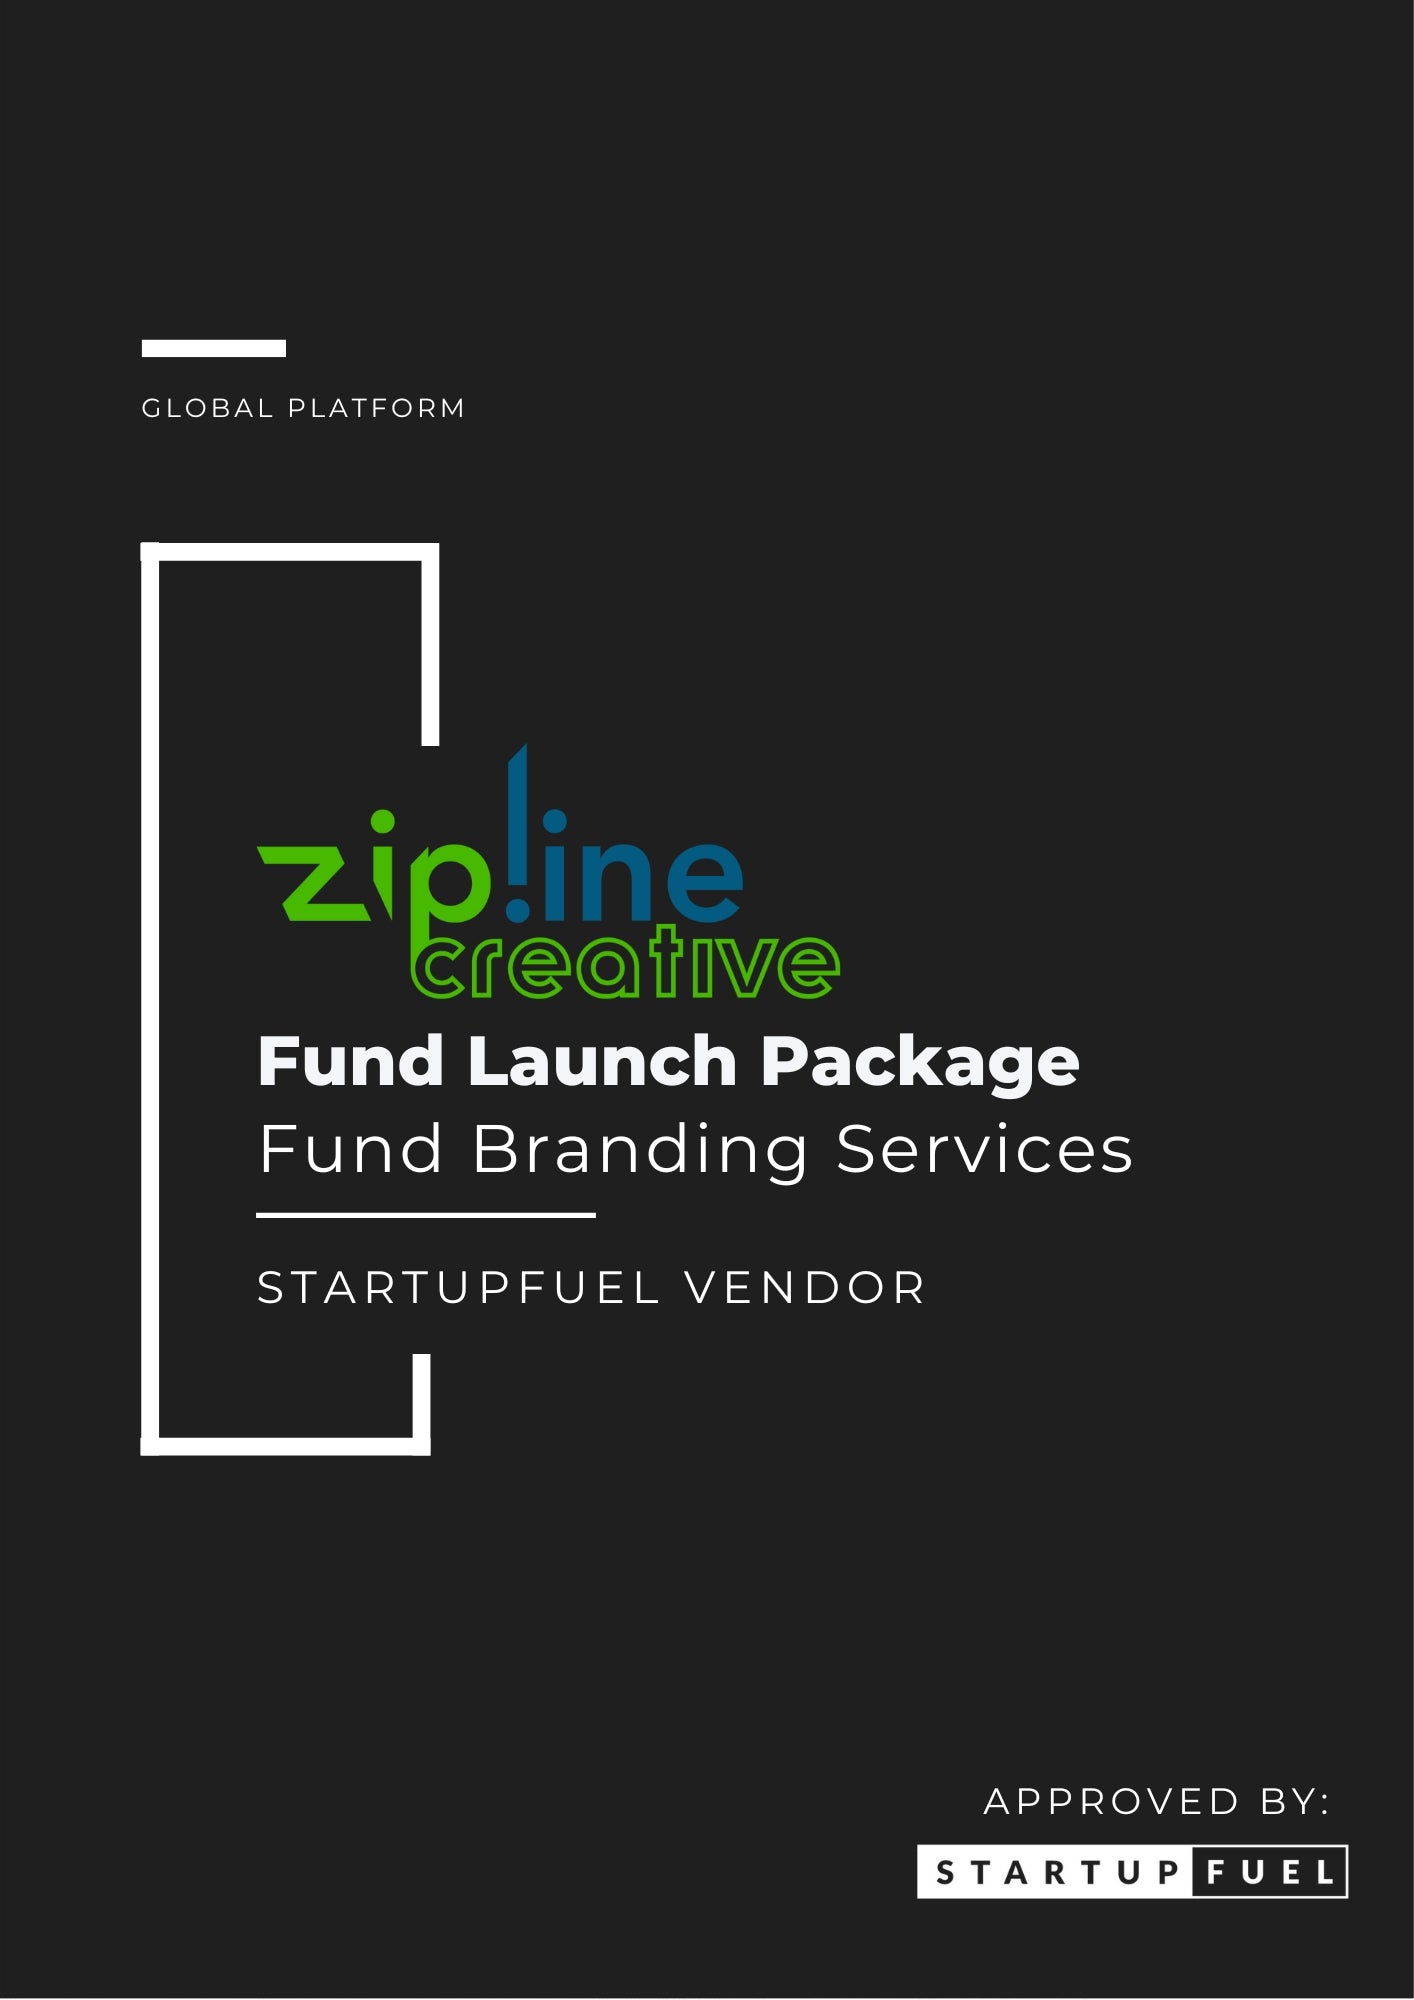 Fund Launch Package